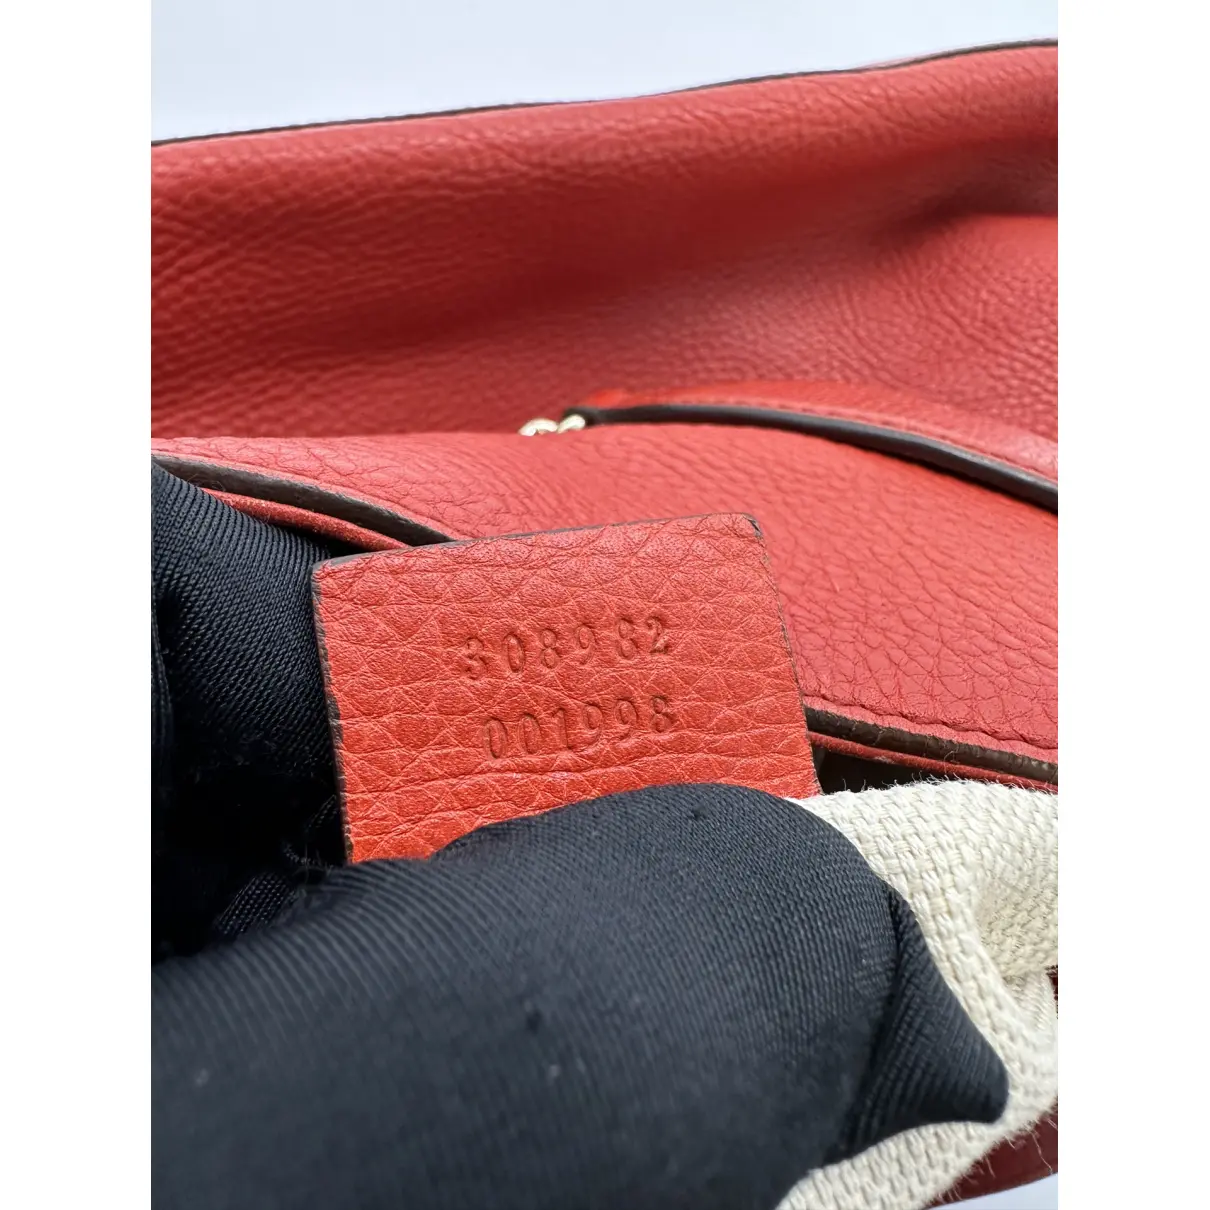 Buy Gucci Soho leather tote online